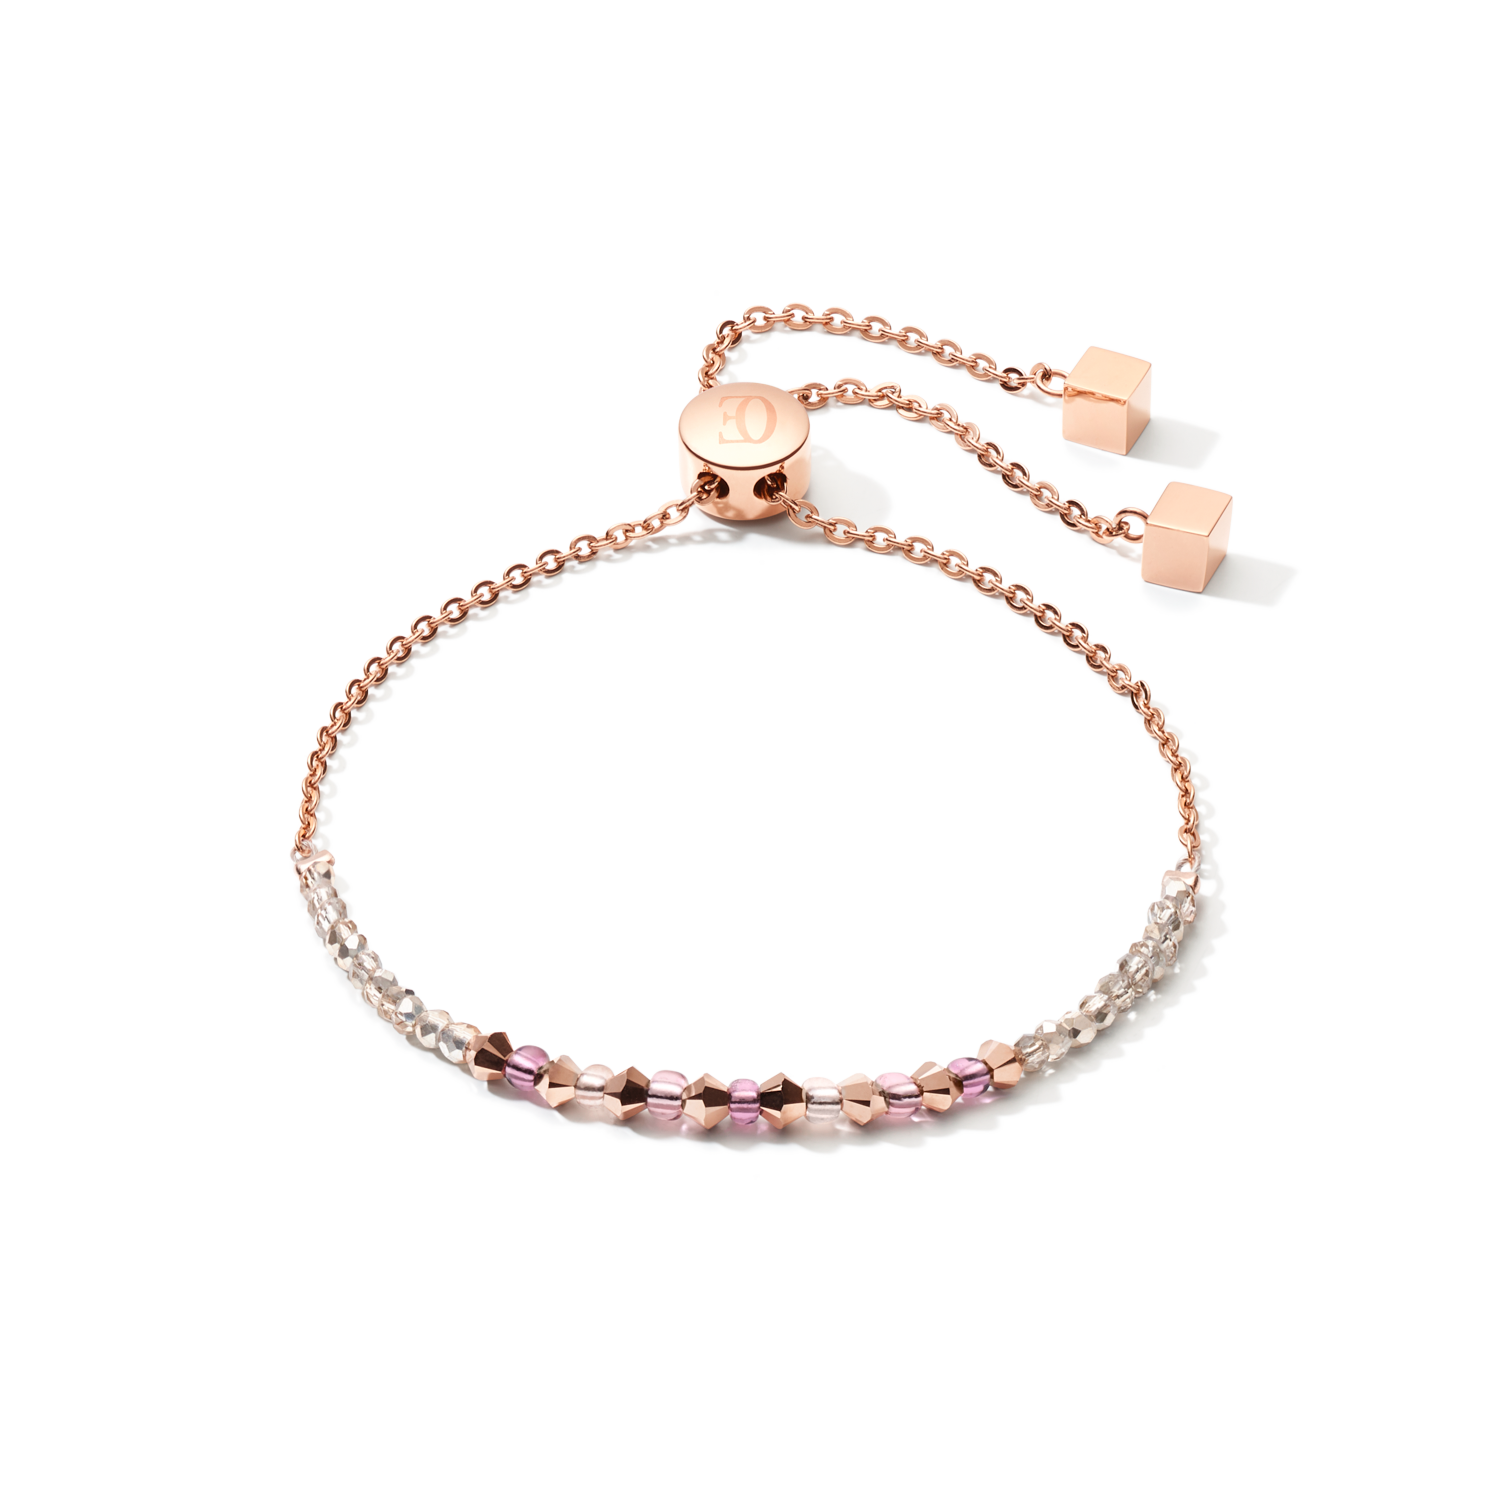 Bracelet 2-layers fine crystals & stainless steel rose gold lilac